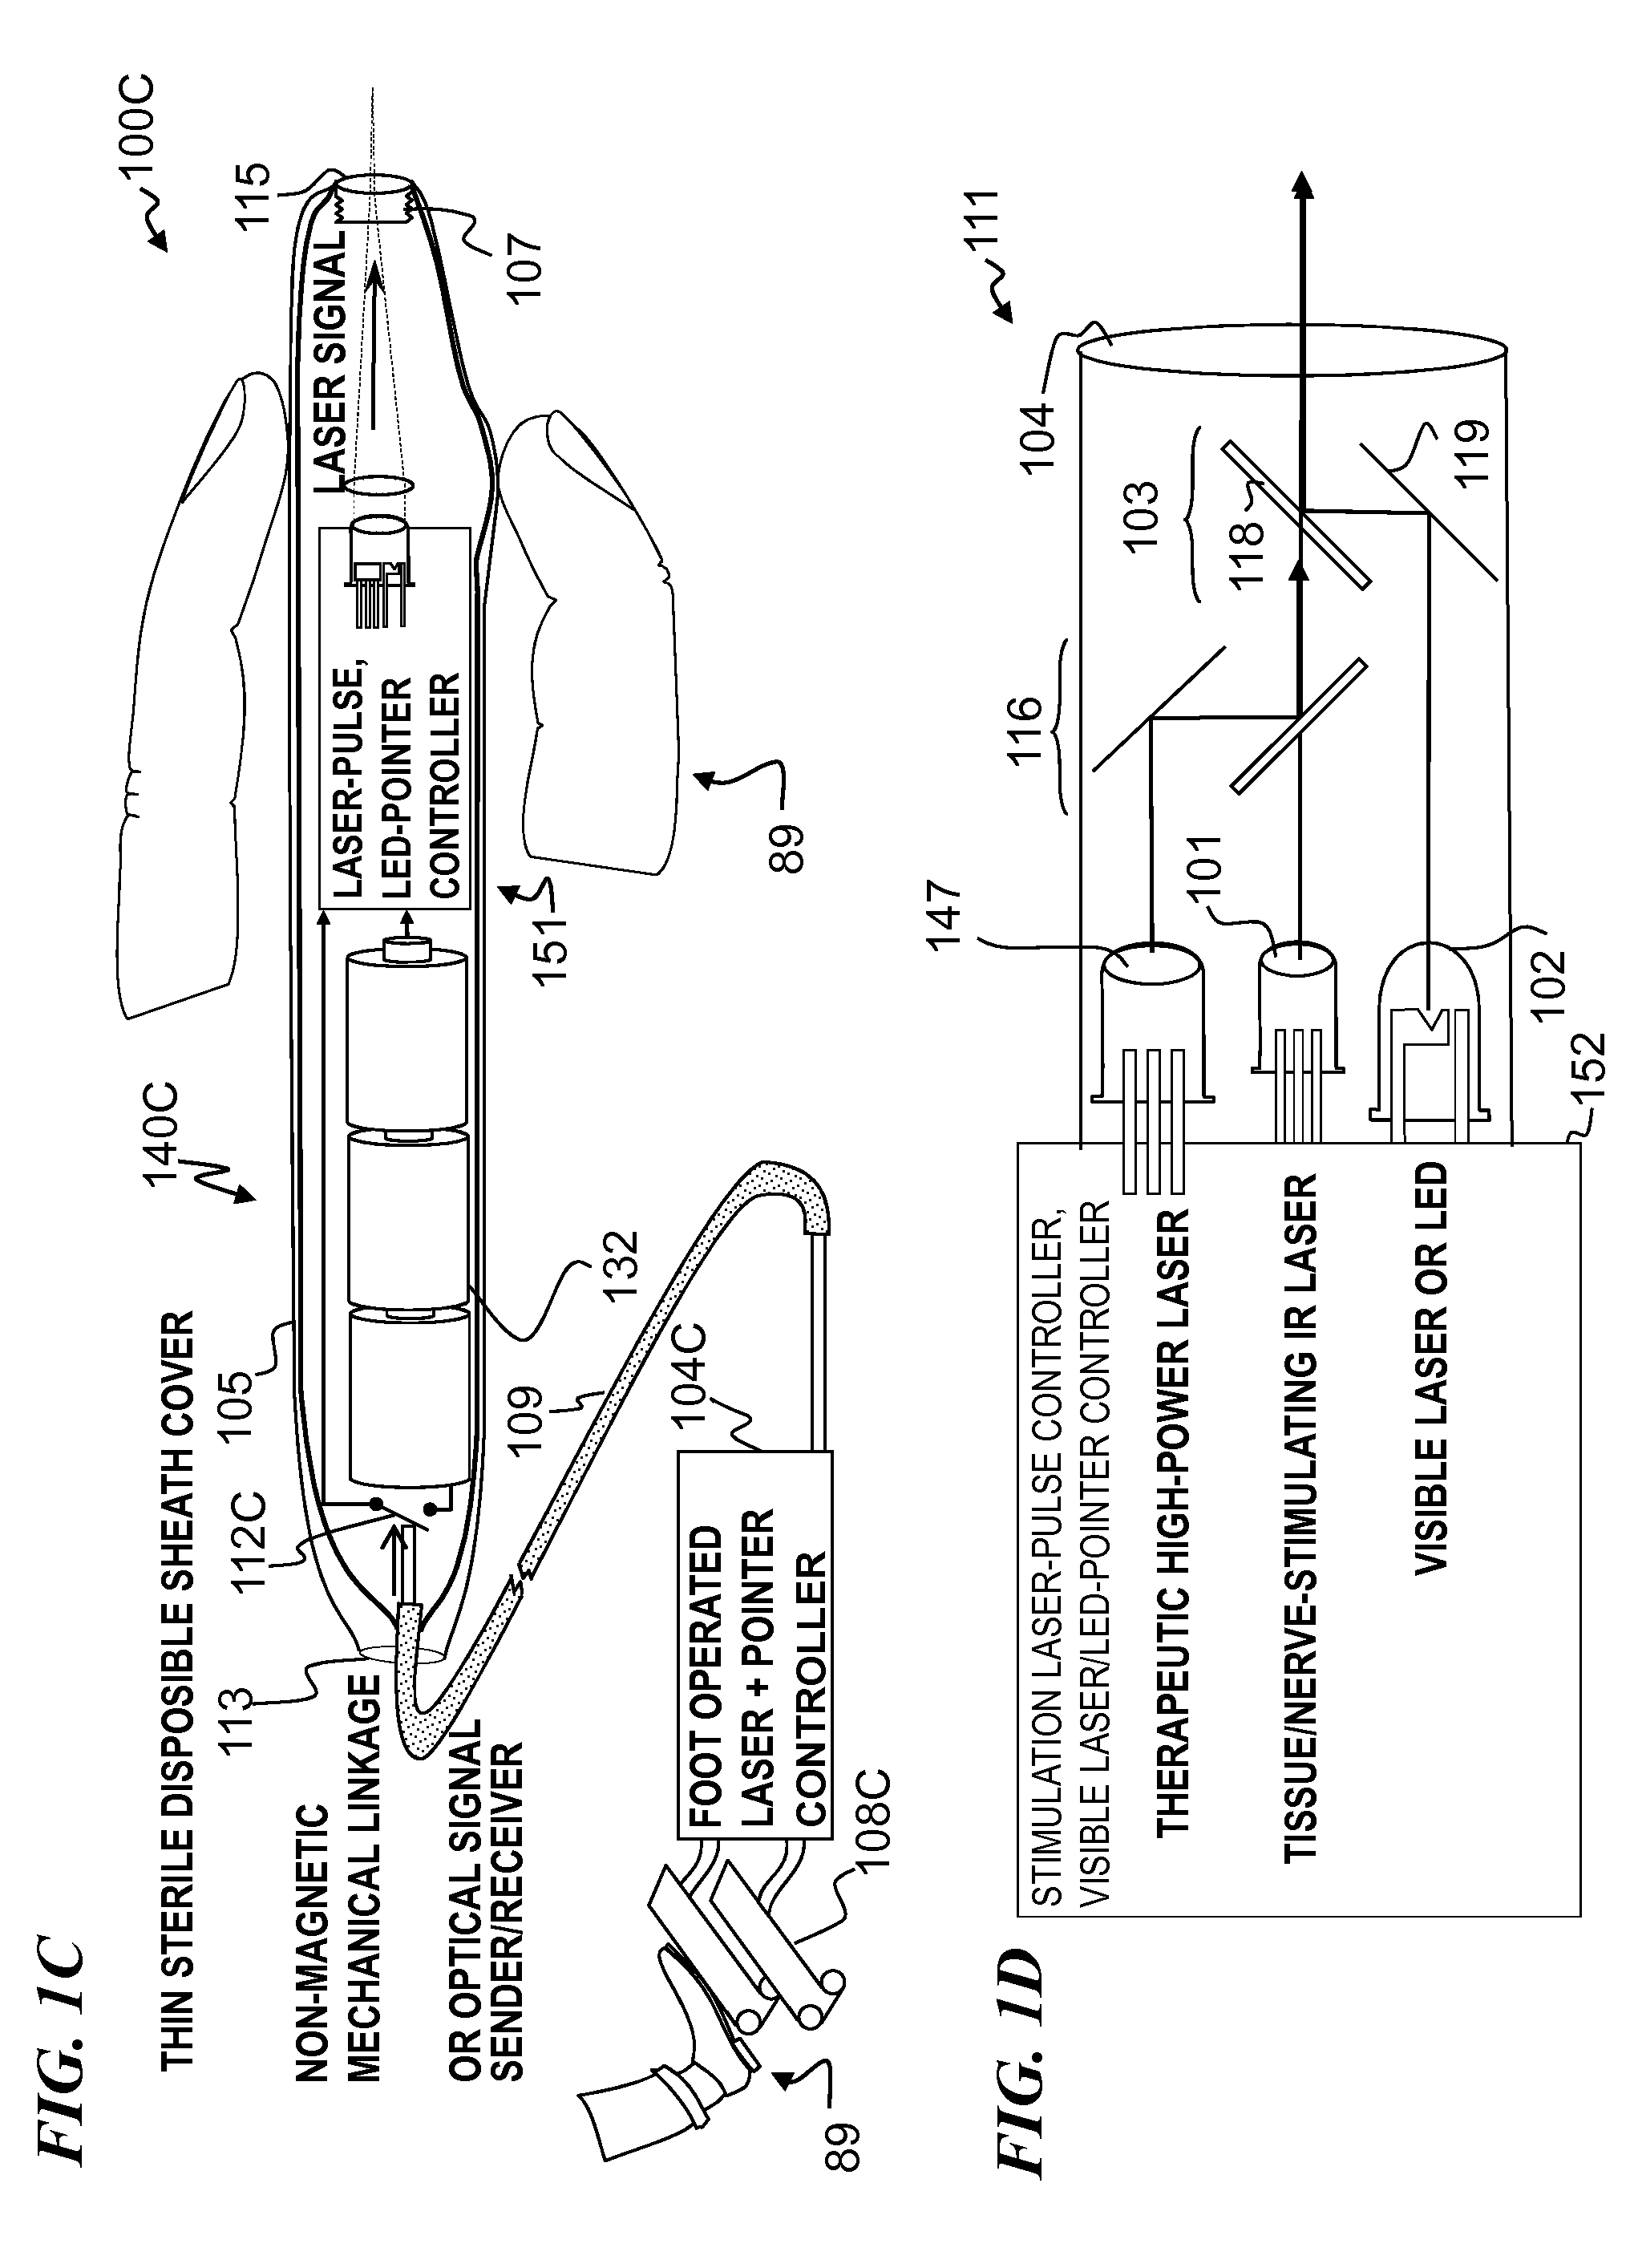 Miniature apparatus and method for optical stimulation of nerves and other animal tissue